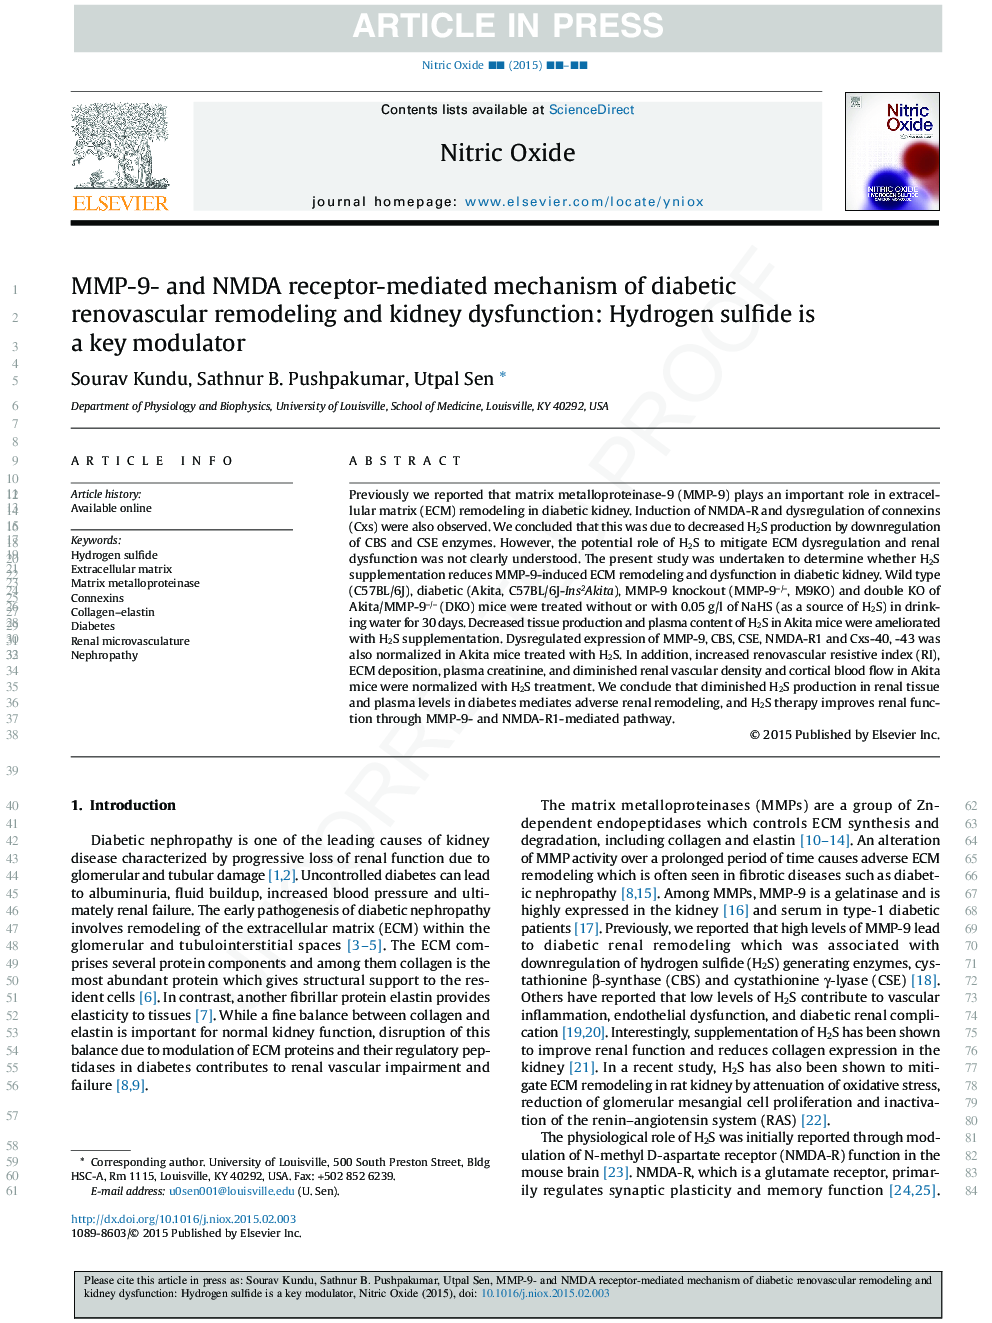 MMP-9- and NMDA receptor-mediated mechanism of diabetic renovascular remodeling and kidney dysfunction: Hydrogen sulfide is a key modulator